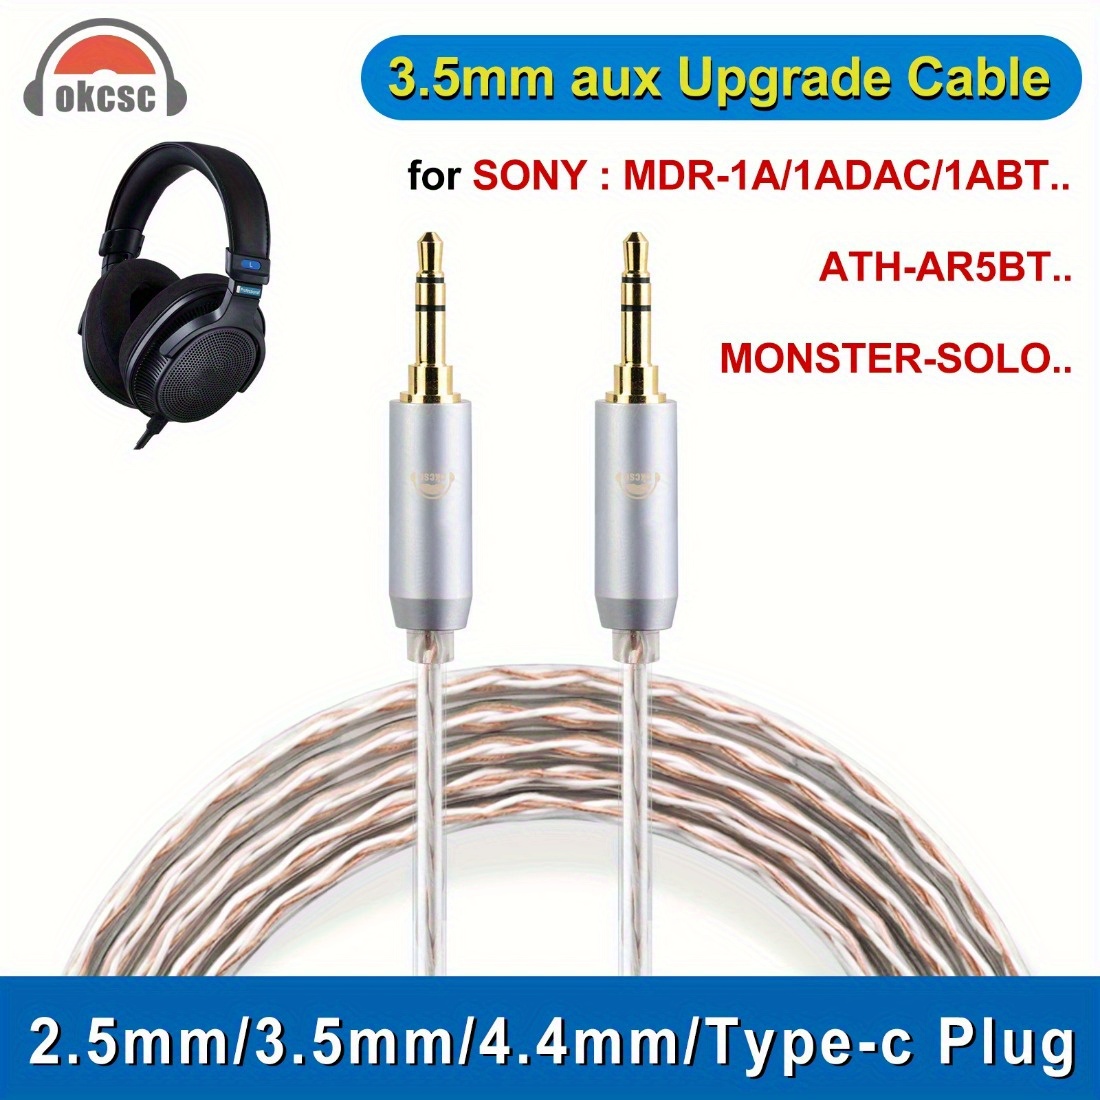  WH-1000XM3 Coiled Audio Cable Replacement for Sony WH-1000XM4,  WH-1000XM2 Headsets, 1/8” Extension Cord with 1/4” Adapter Works on PS5 PS4  PC Smartphone Xbox One, 4ft to 14ft : Electronics